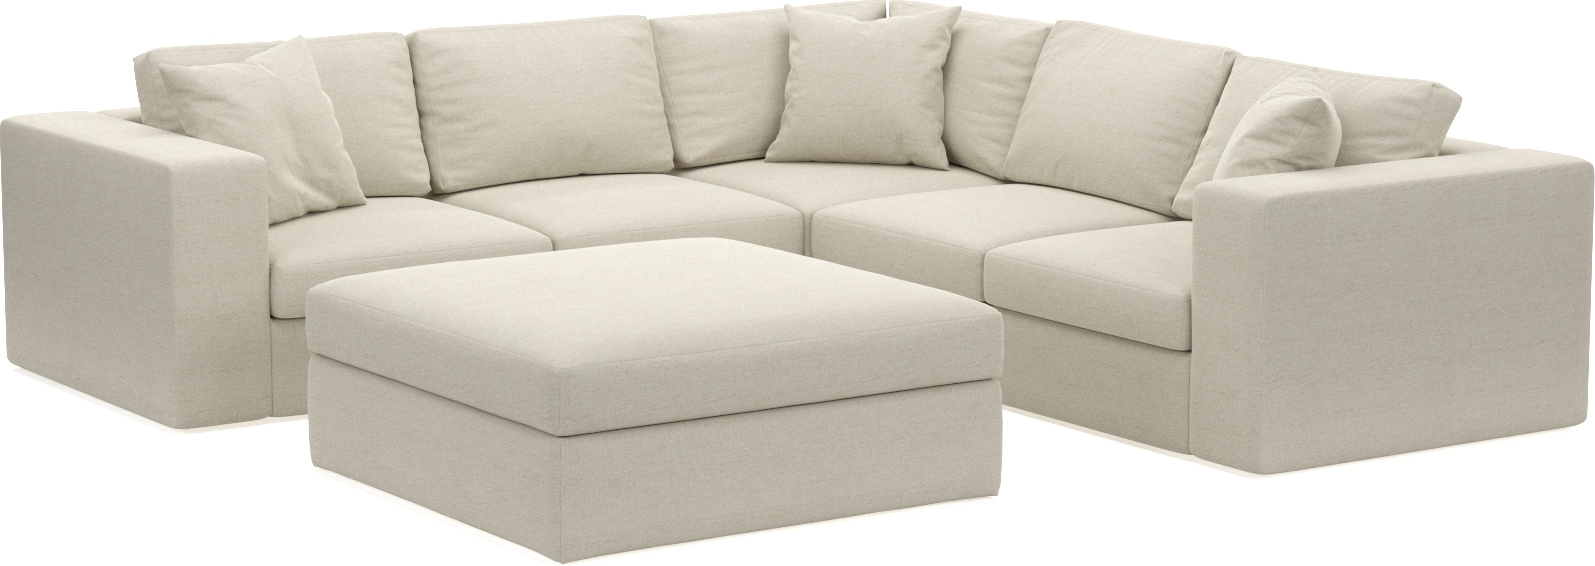 Collin 5 Piece Sectional And Ottoman